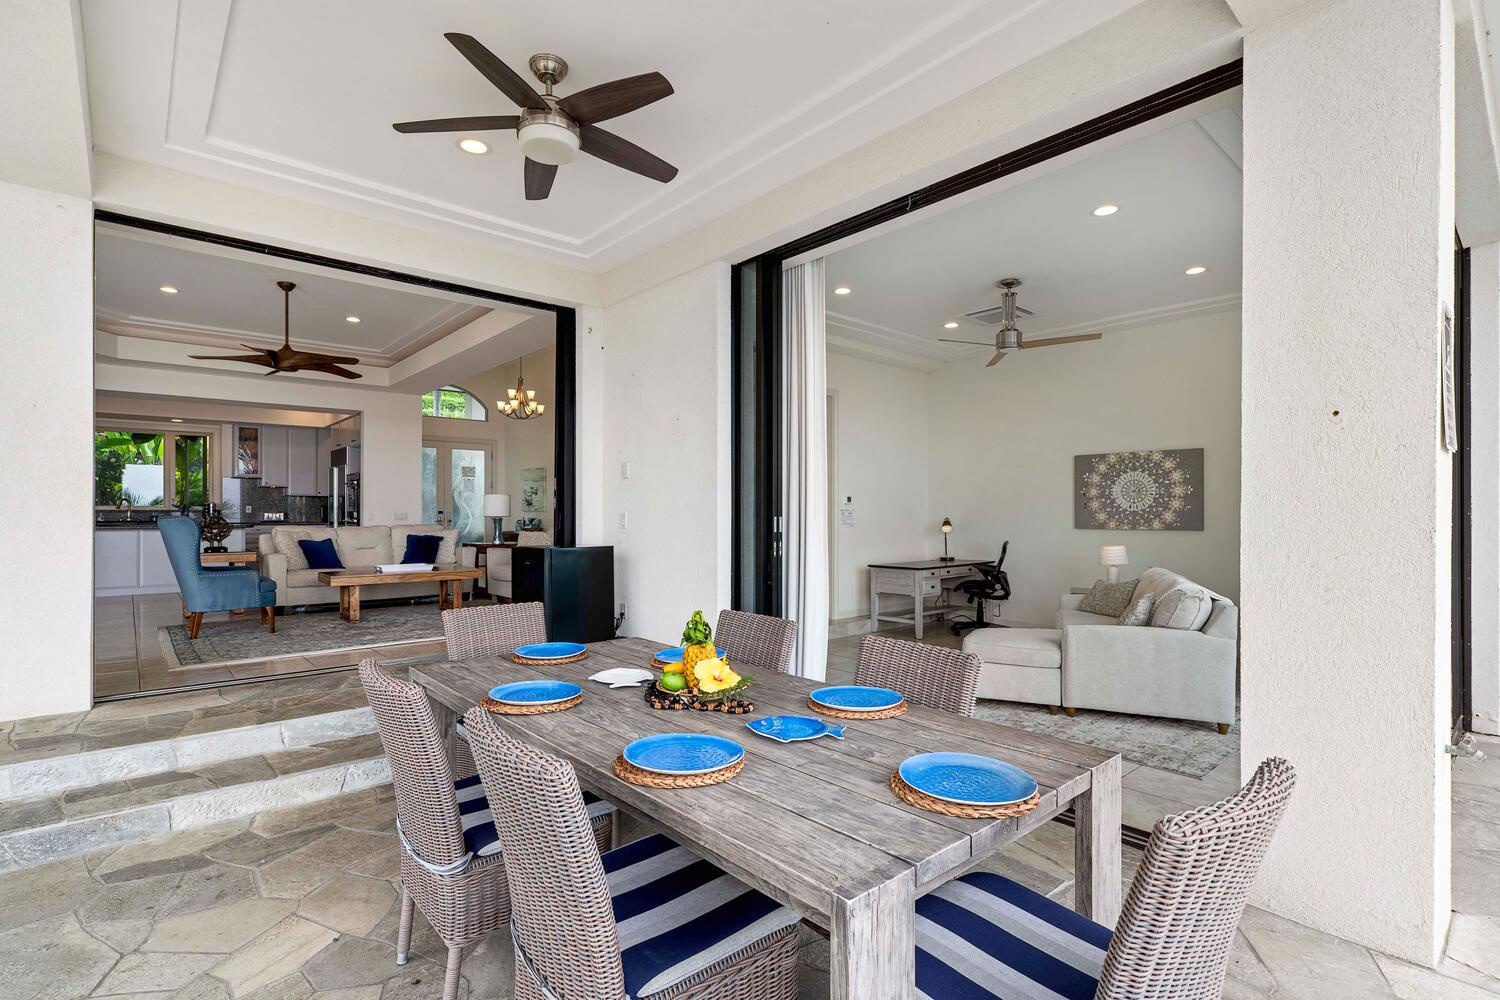 Kailua Kona Vacation Rentals, Blue Hawaii - The al-fresco dining by the pool is just right off the bonus room.